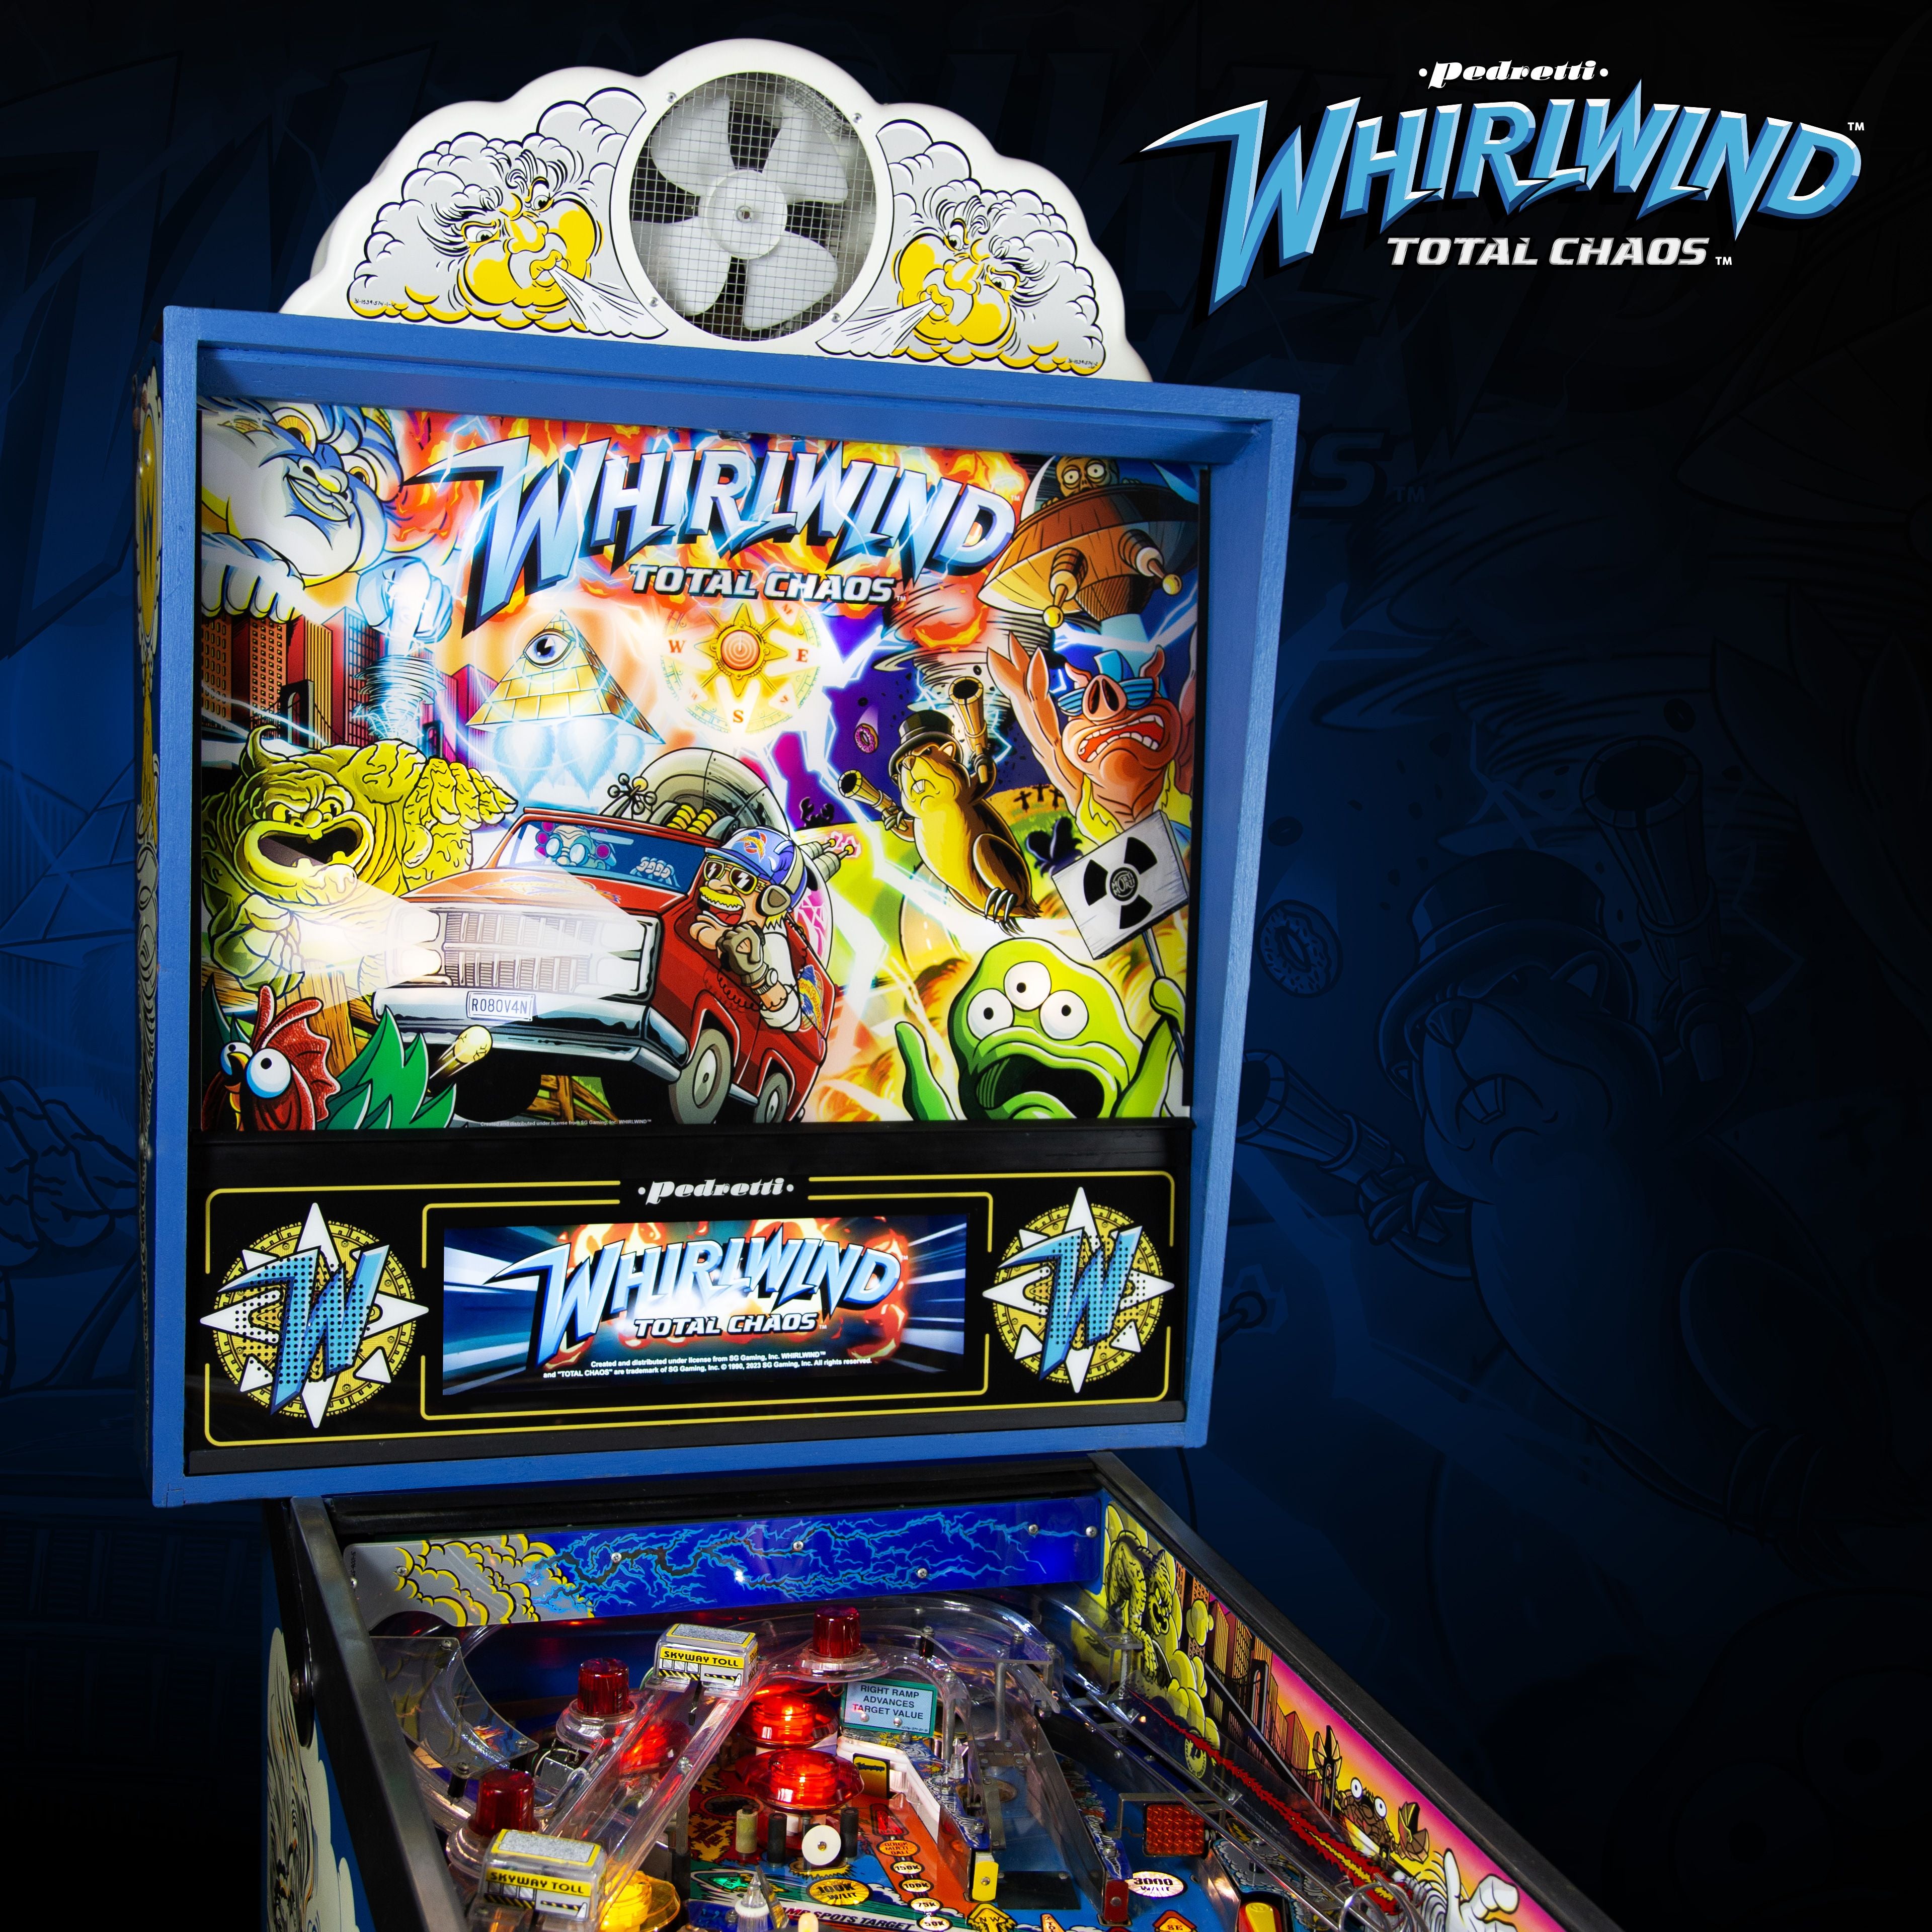 WHIRLWIND: Total Chaos / Upgrade Kit - PREORDER